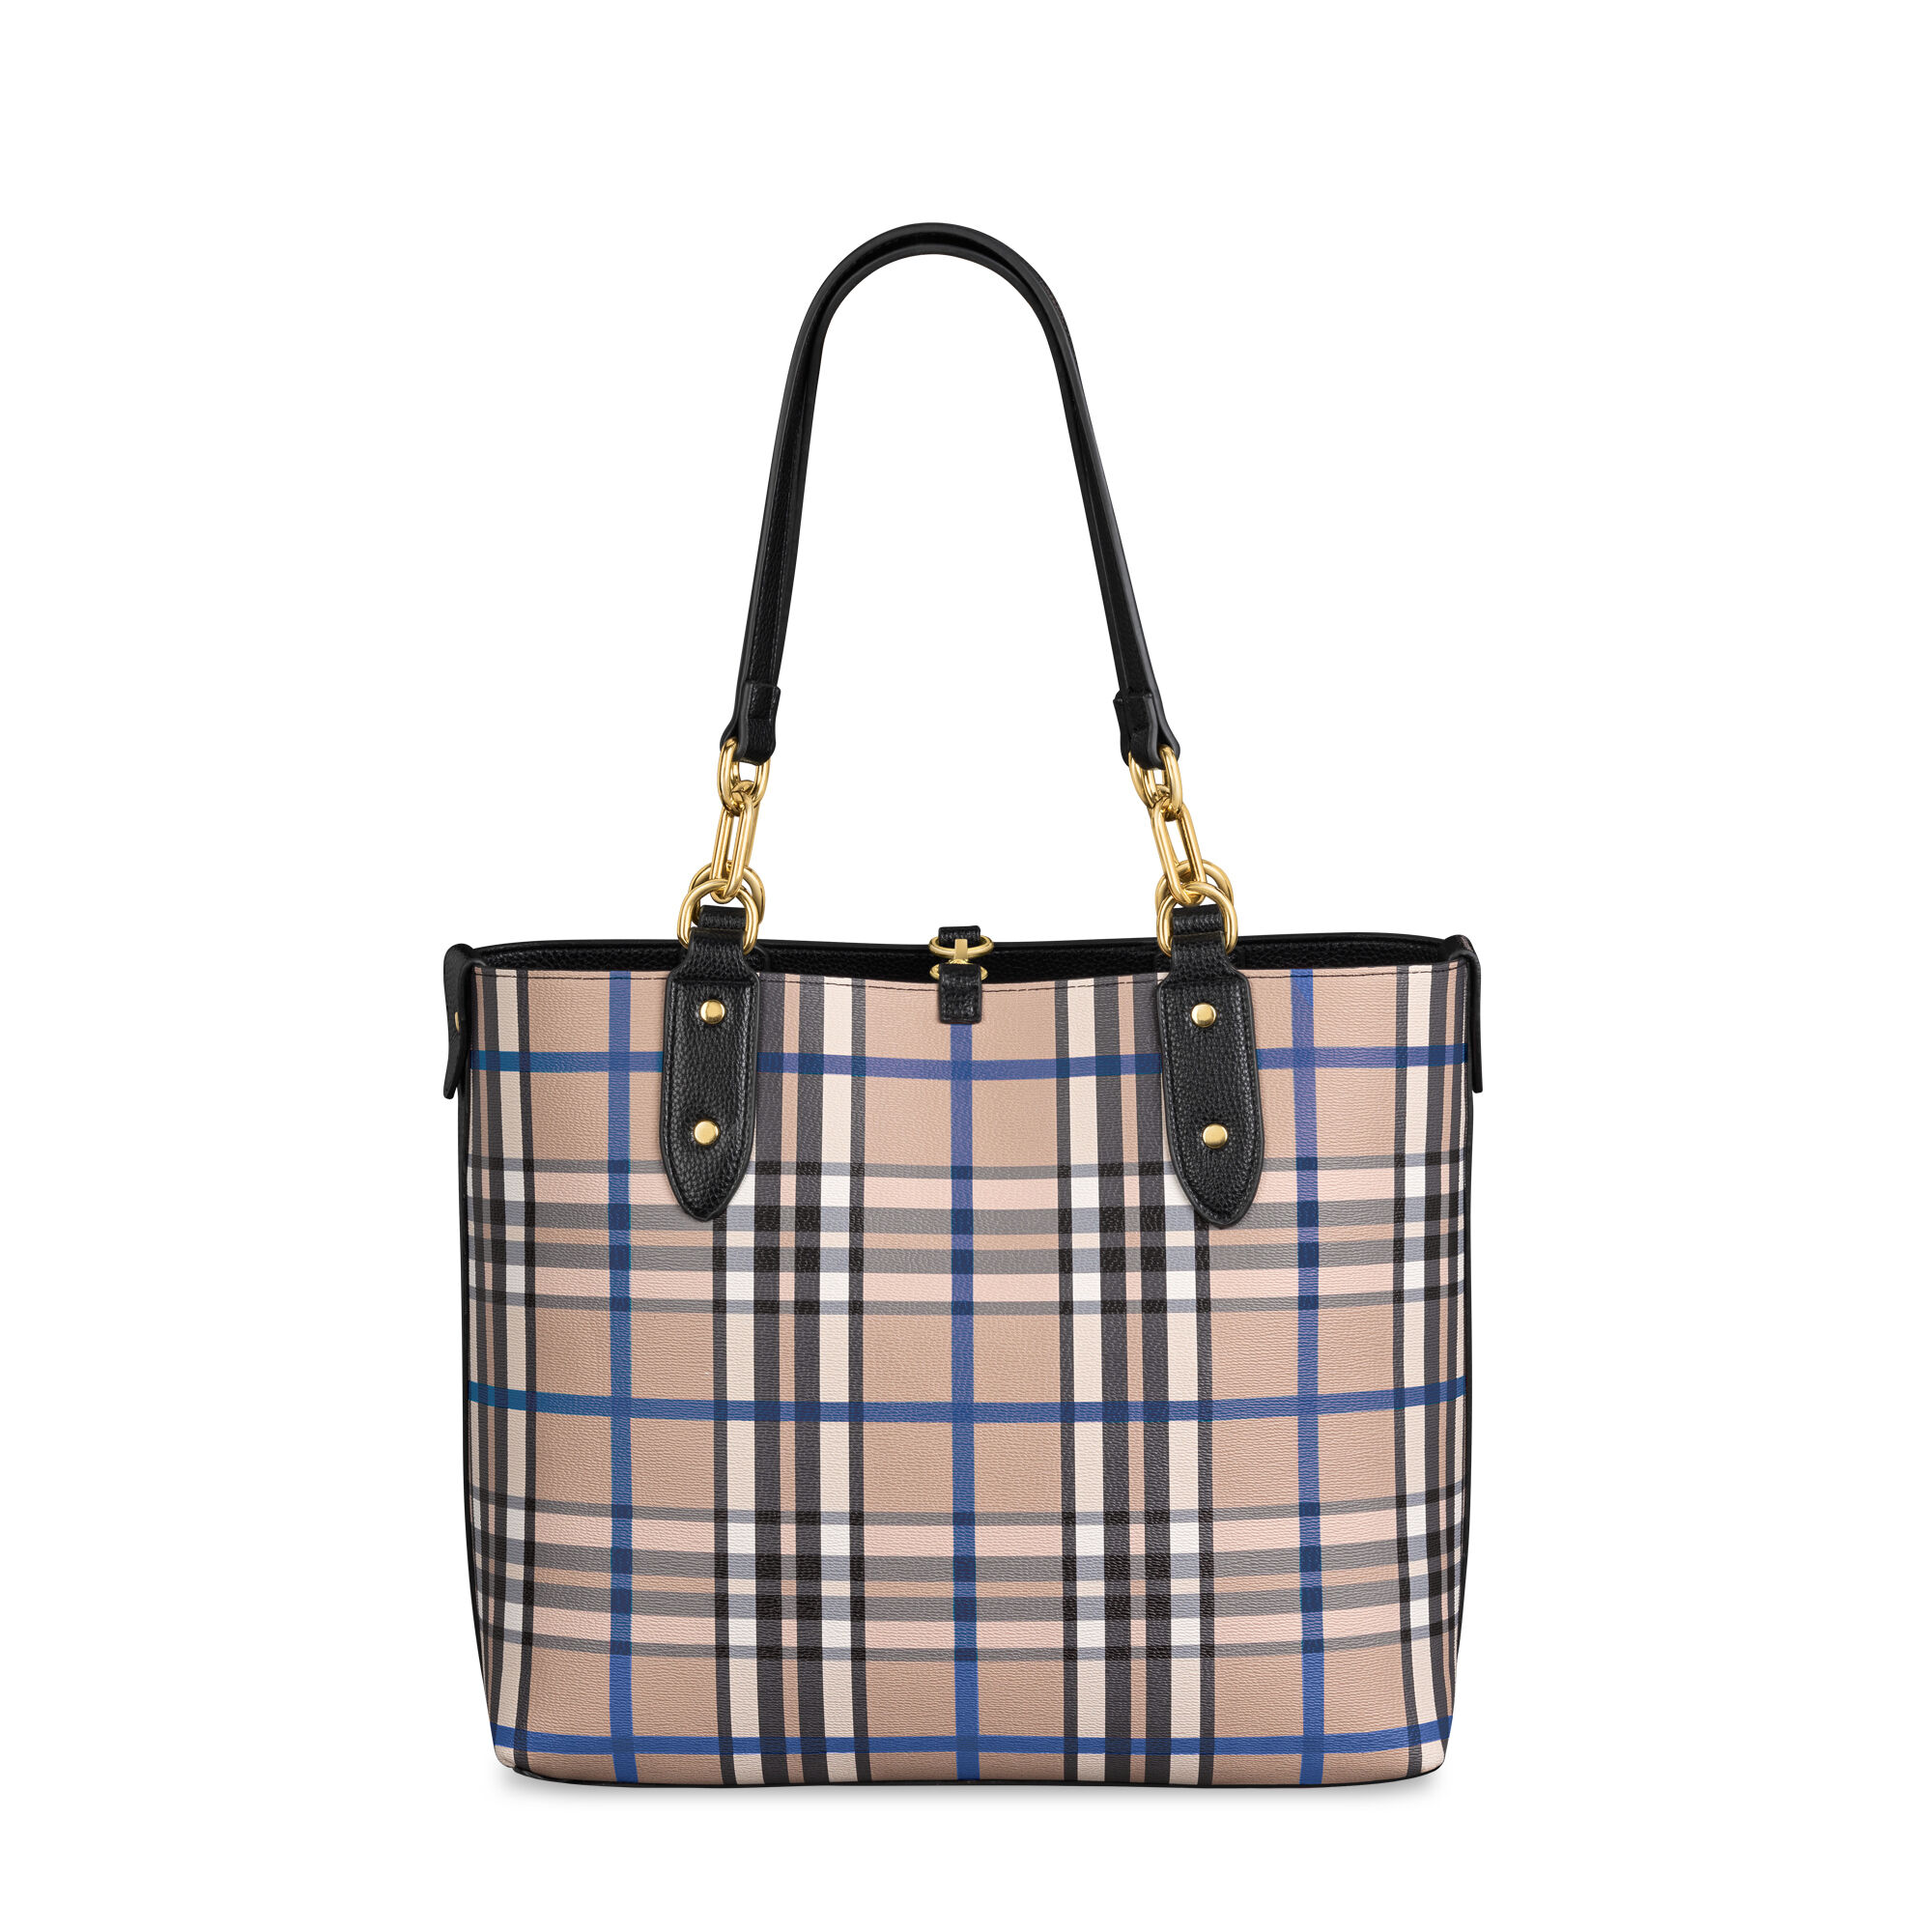 The Oxford Reversible Tote